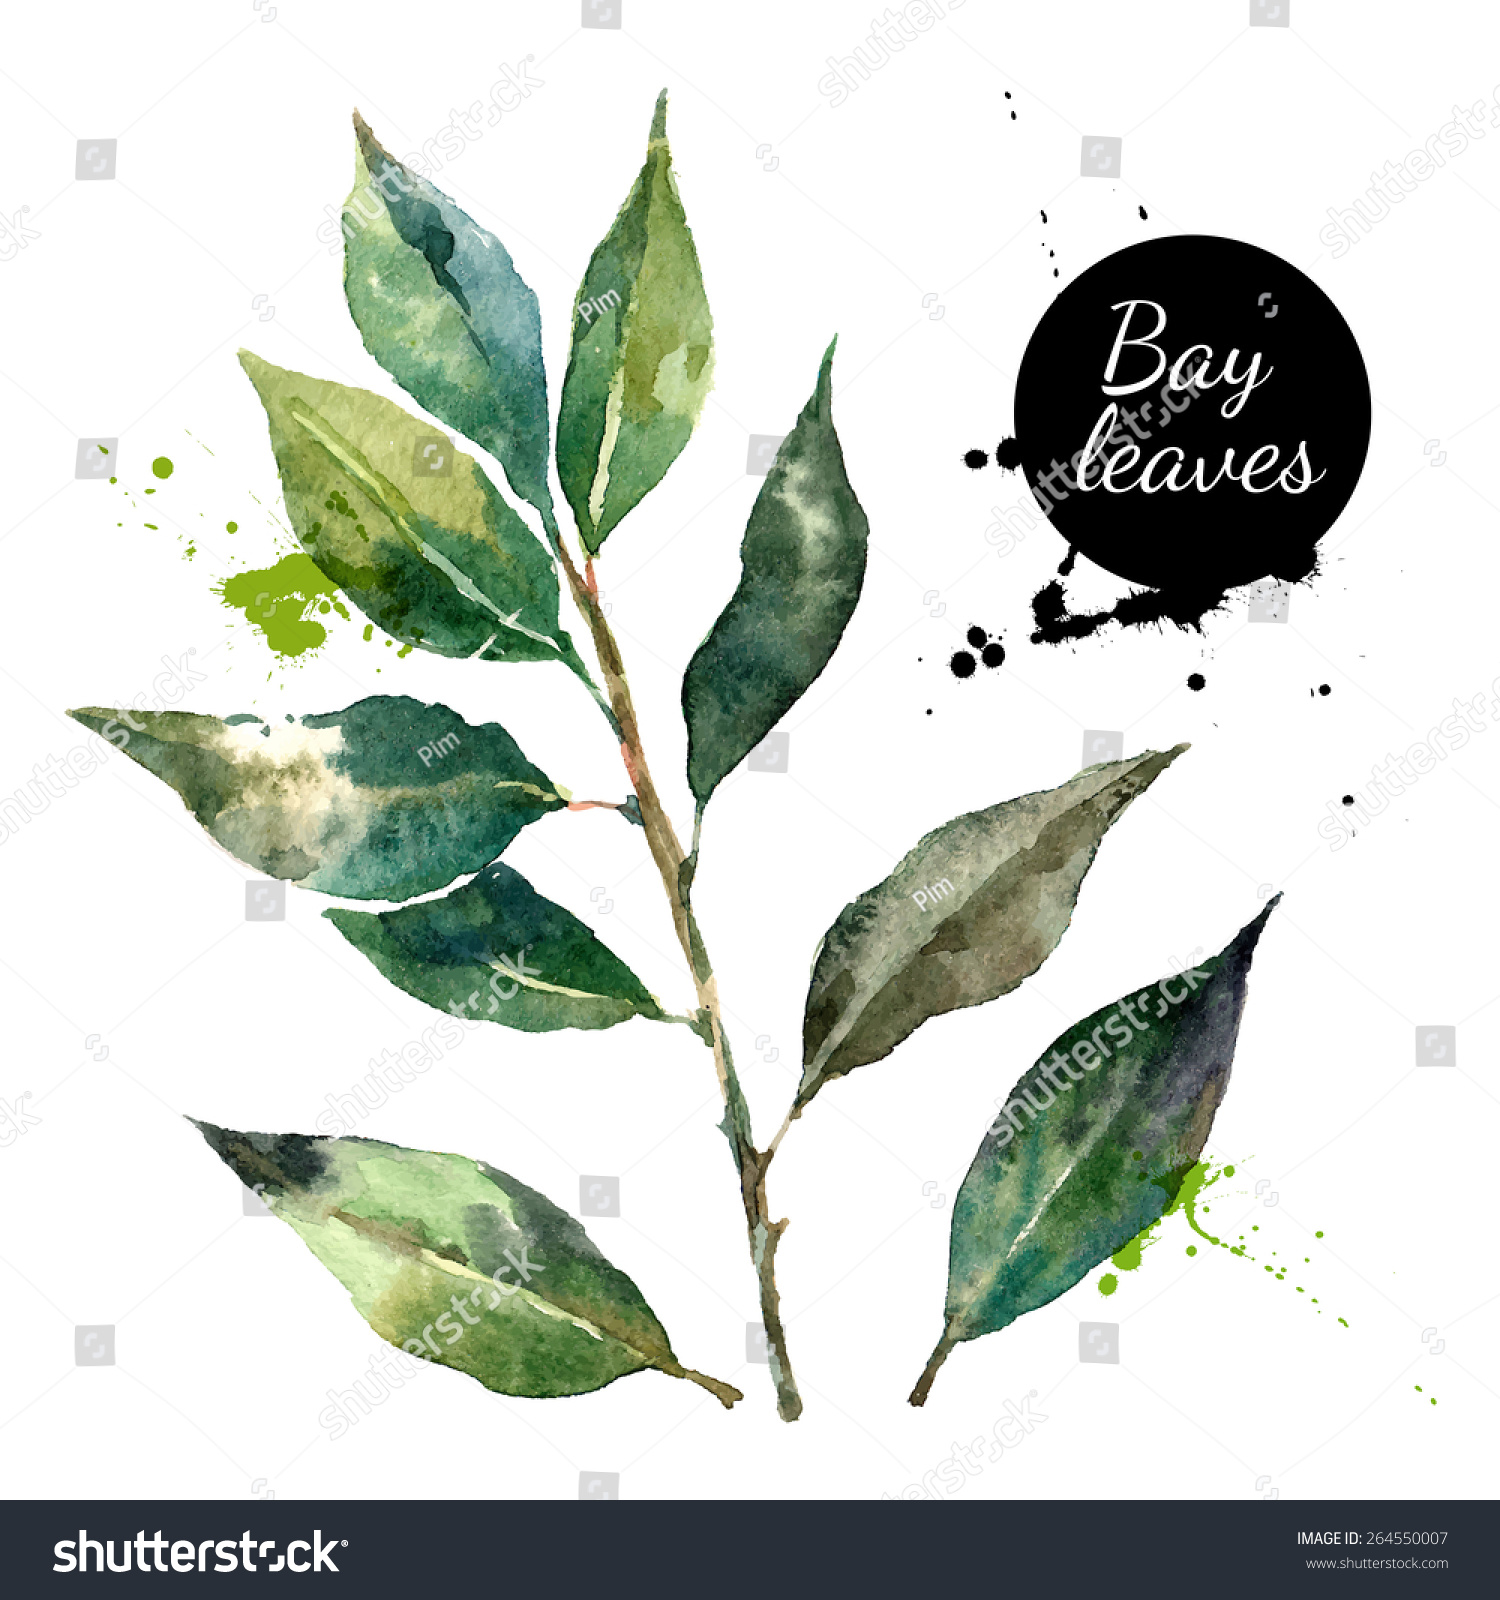 SVG of Kitchen herbs and spices banner. Vector illustration. Watercolor bay leaf svg